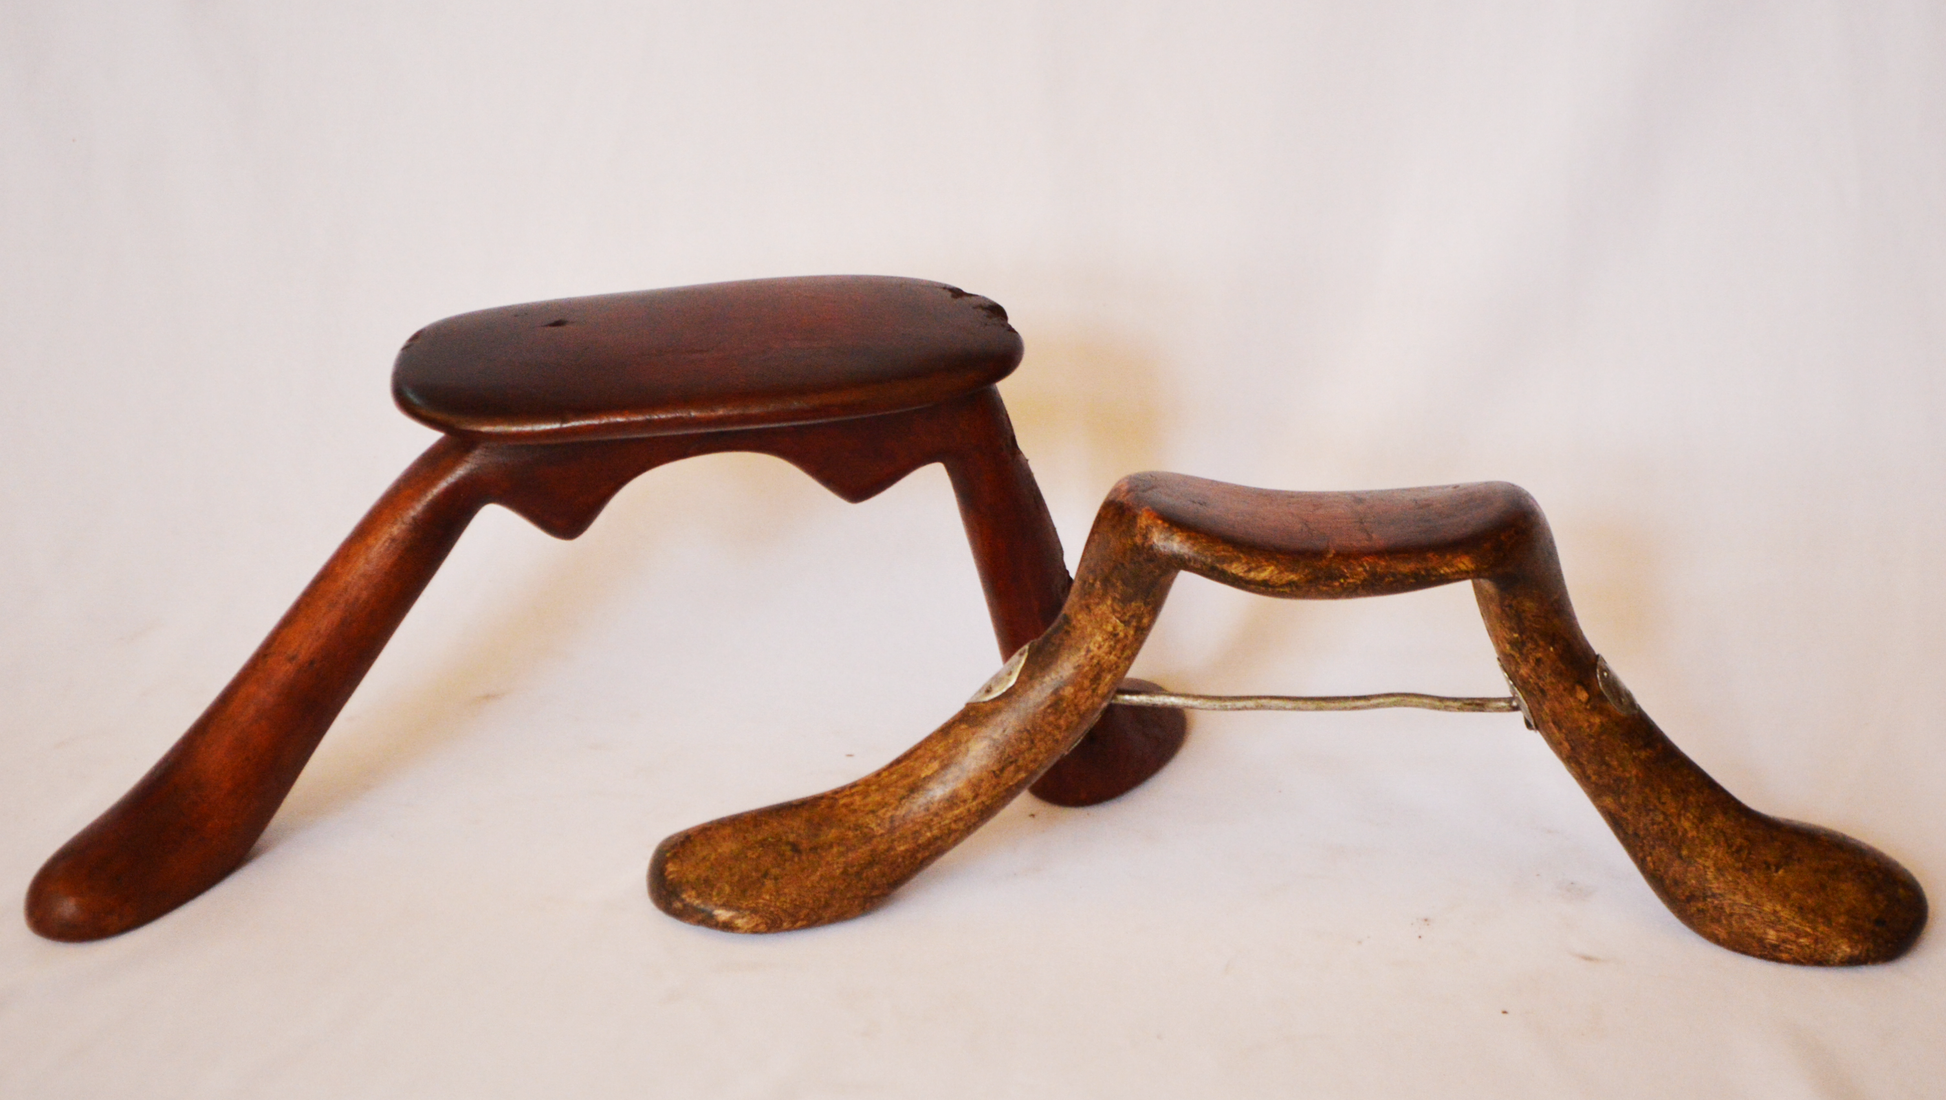 Marakwet Headrest - Authentic African handicrafts | Clothing, bags, painting, toys & more - CULTURE HUB by Muthoni Unchained